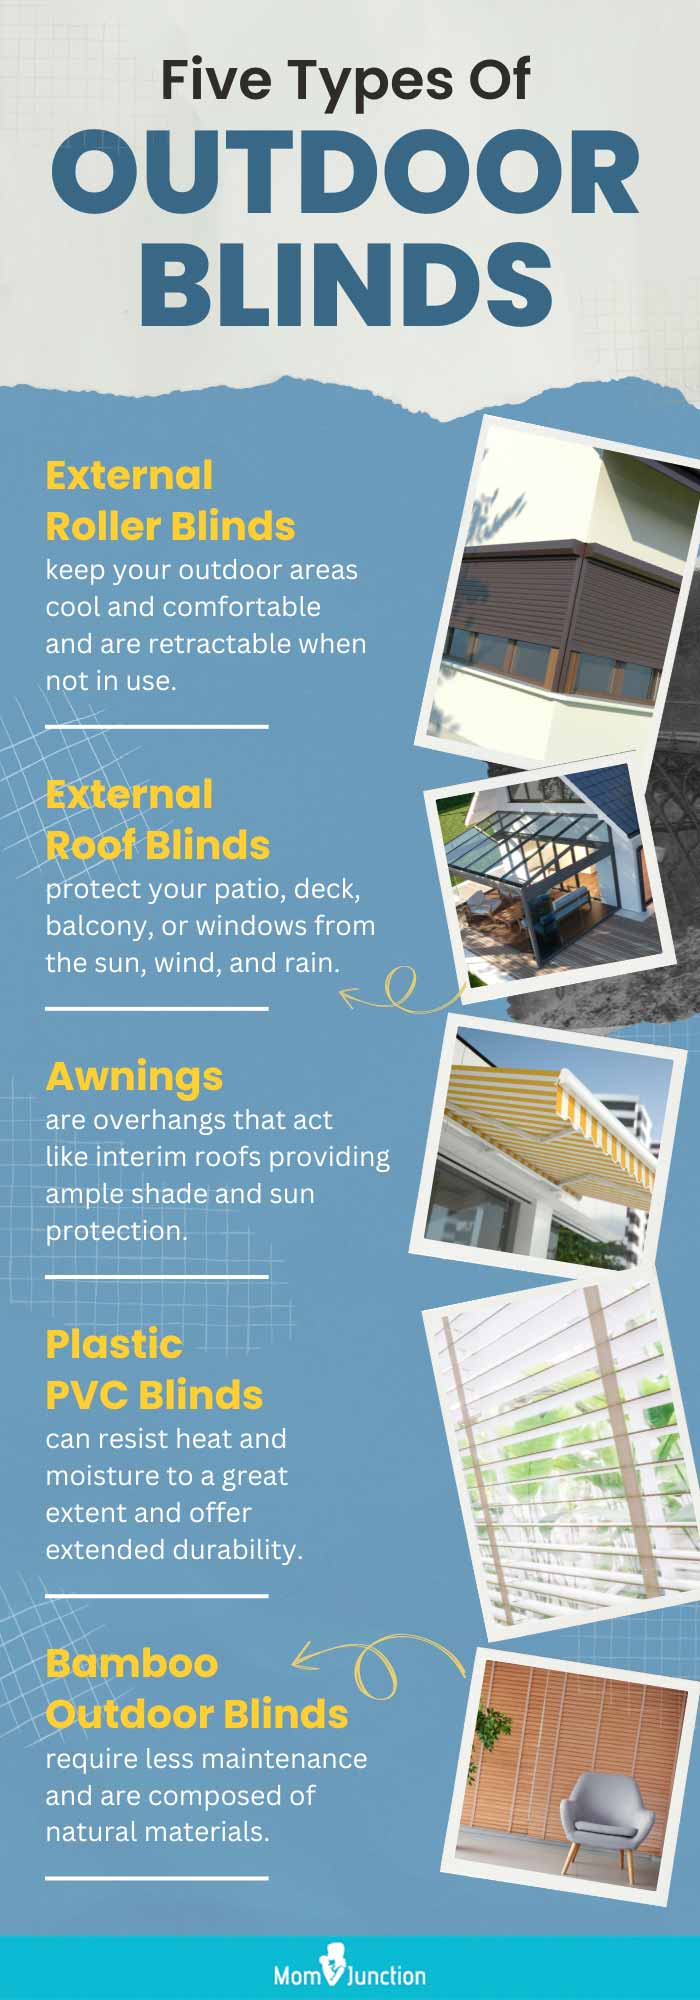 Five Types Of Outdoor Blinds (infographic)